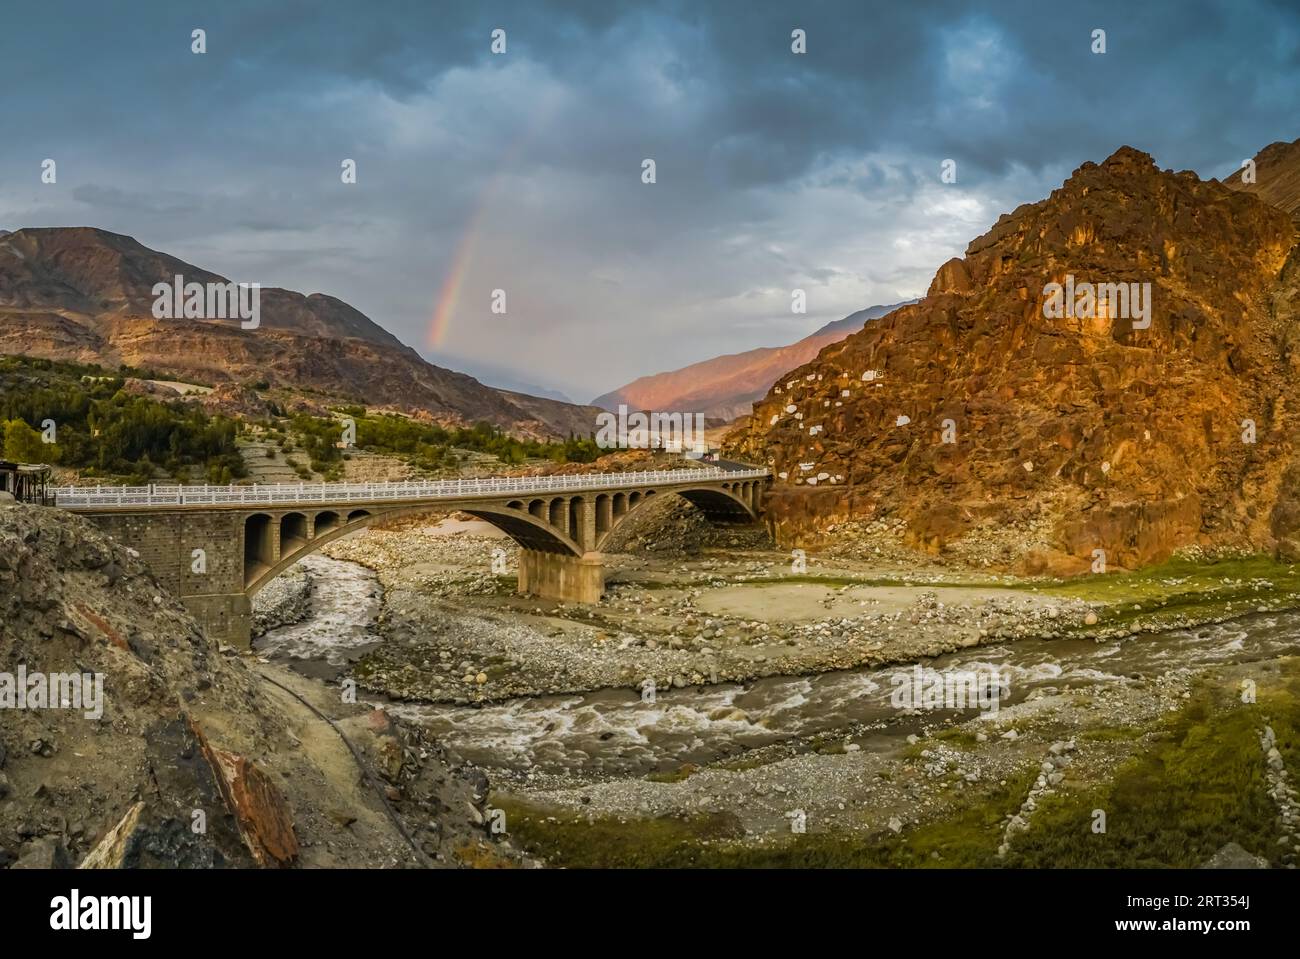 Rainbow in the clouds above bridge crossing river in arid mountains in Pakistan Stock Photo